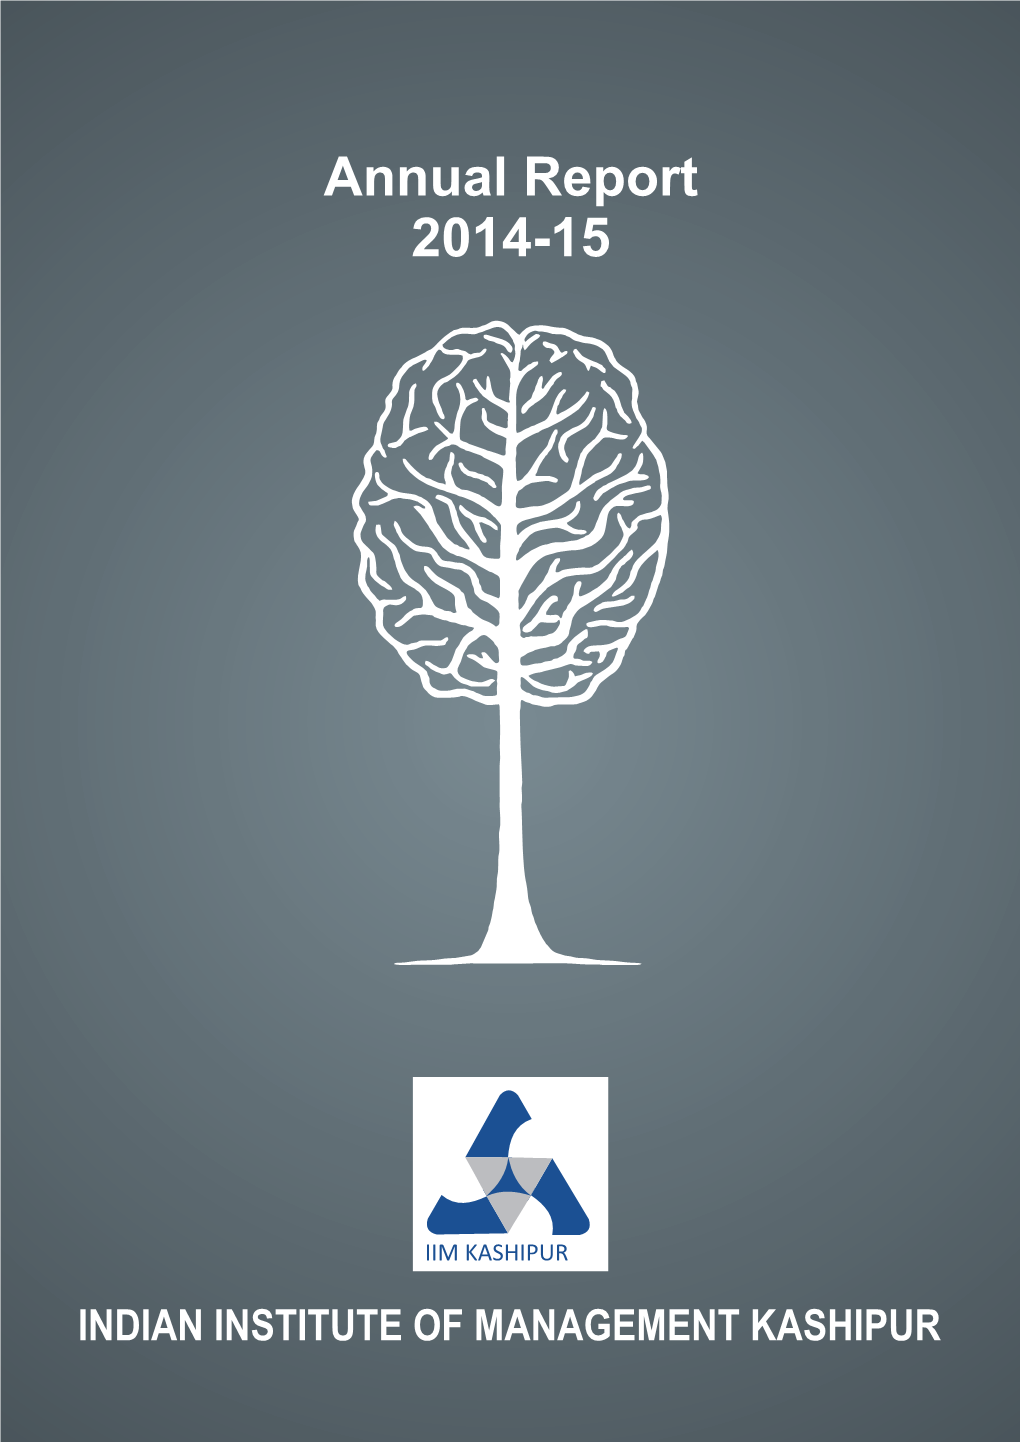 Annual Report 2014-15 Working File.Cdr